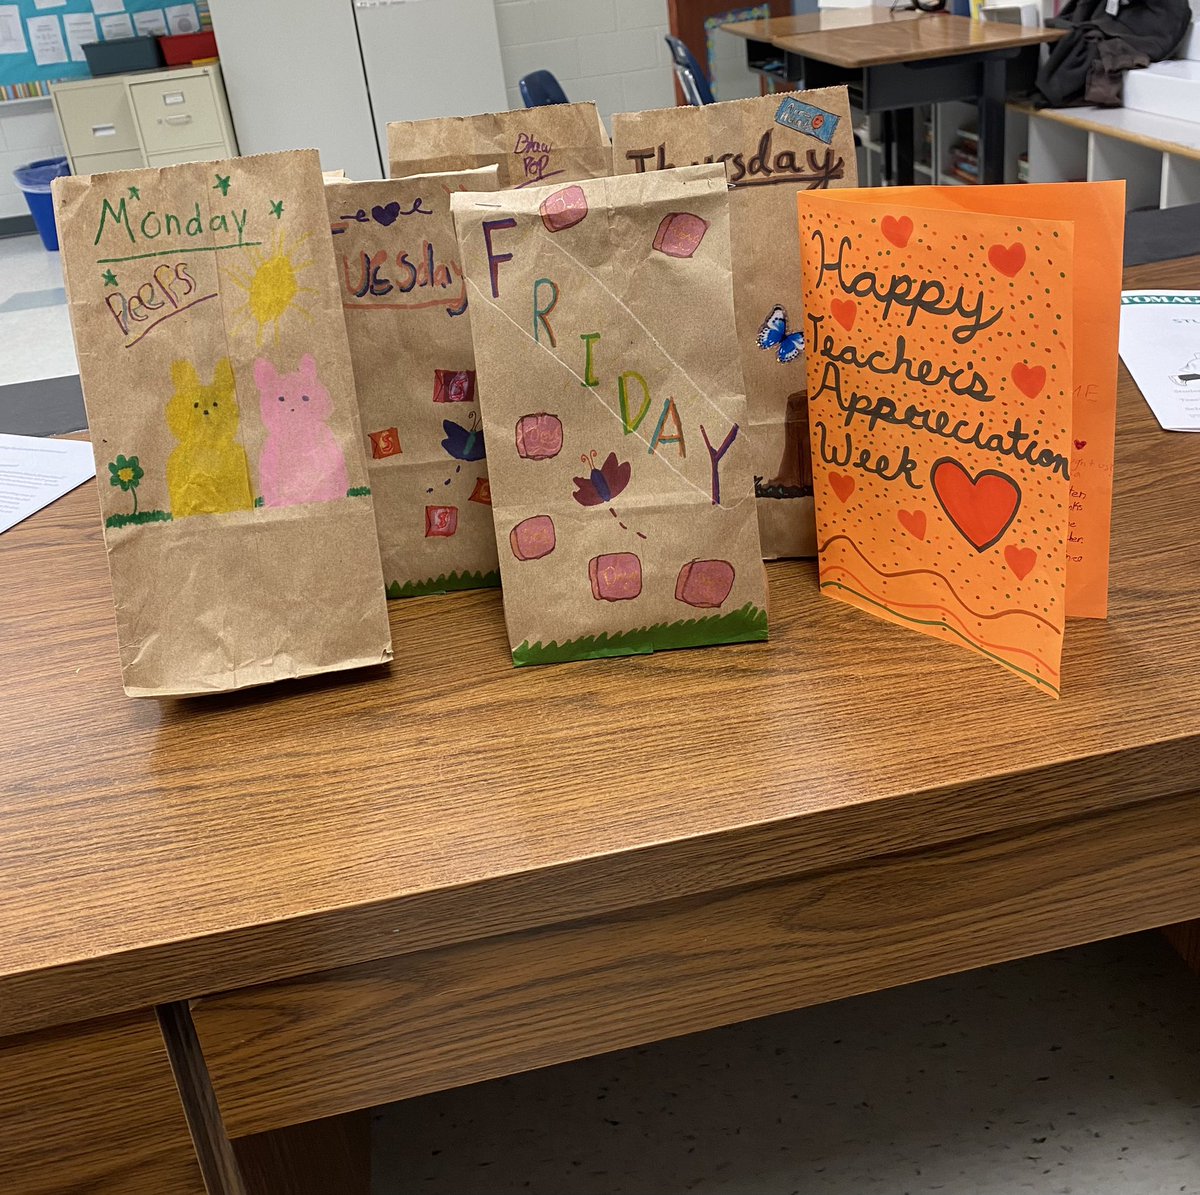 The biggest thank you to my three students who collaborated and surprised me with the sweetest card and a bag of candy every day this week❤️ #WeAreWJCC @WJCCSchools